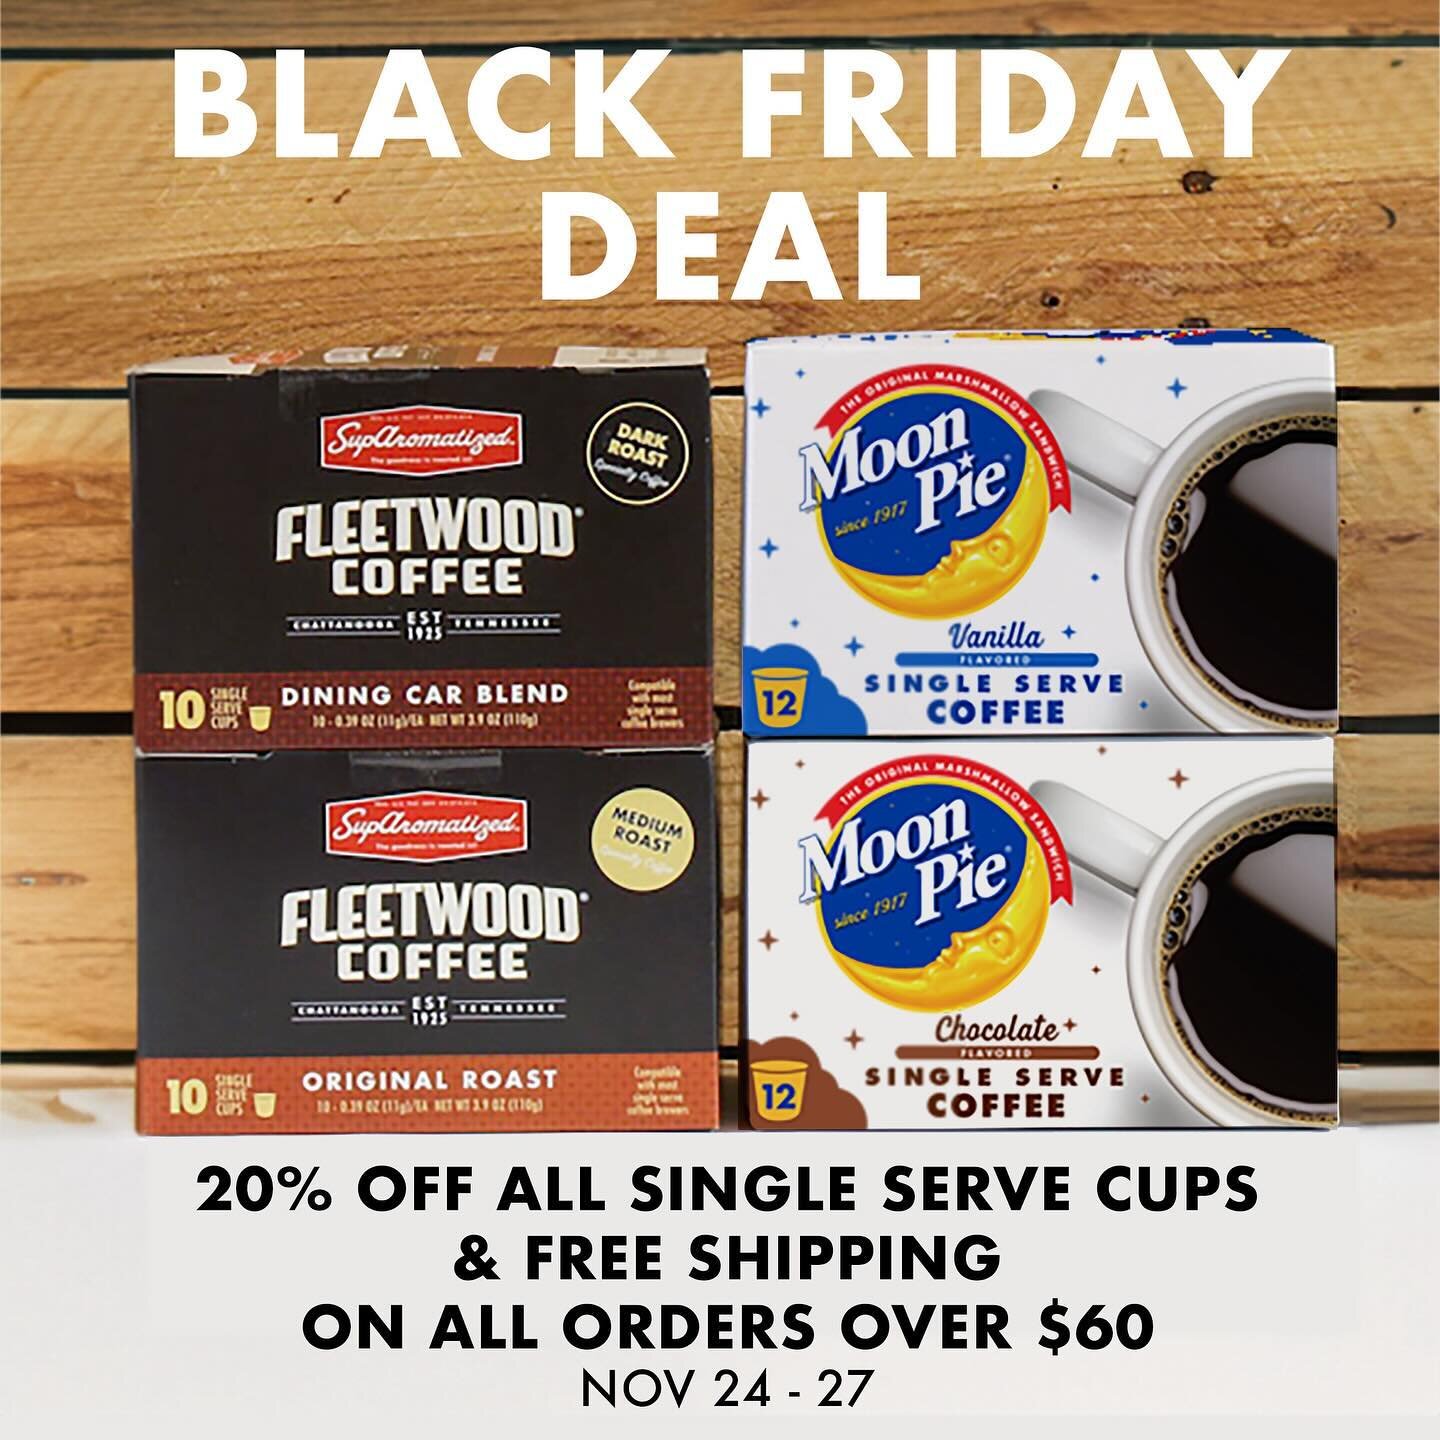 Black Friday and Cyber Monday Sneak Peek! 
Get 20% OFF our single serve cups November 24 - 27! But that&rsquo;s not all! Also get FREE shipping on all orders over $60. It&rsquo;s a perfect way to stock up for the holidays. 

Don&rsquo;t want to miss 